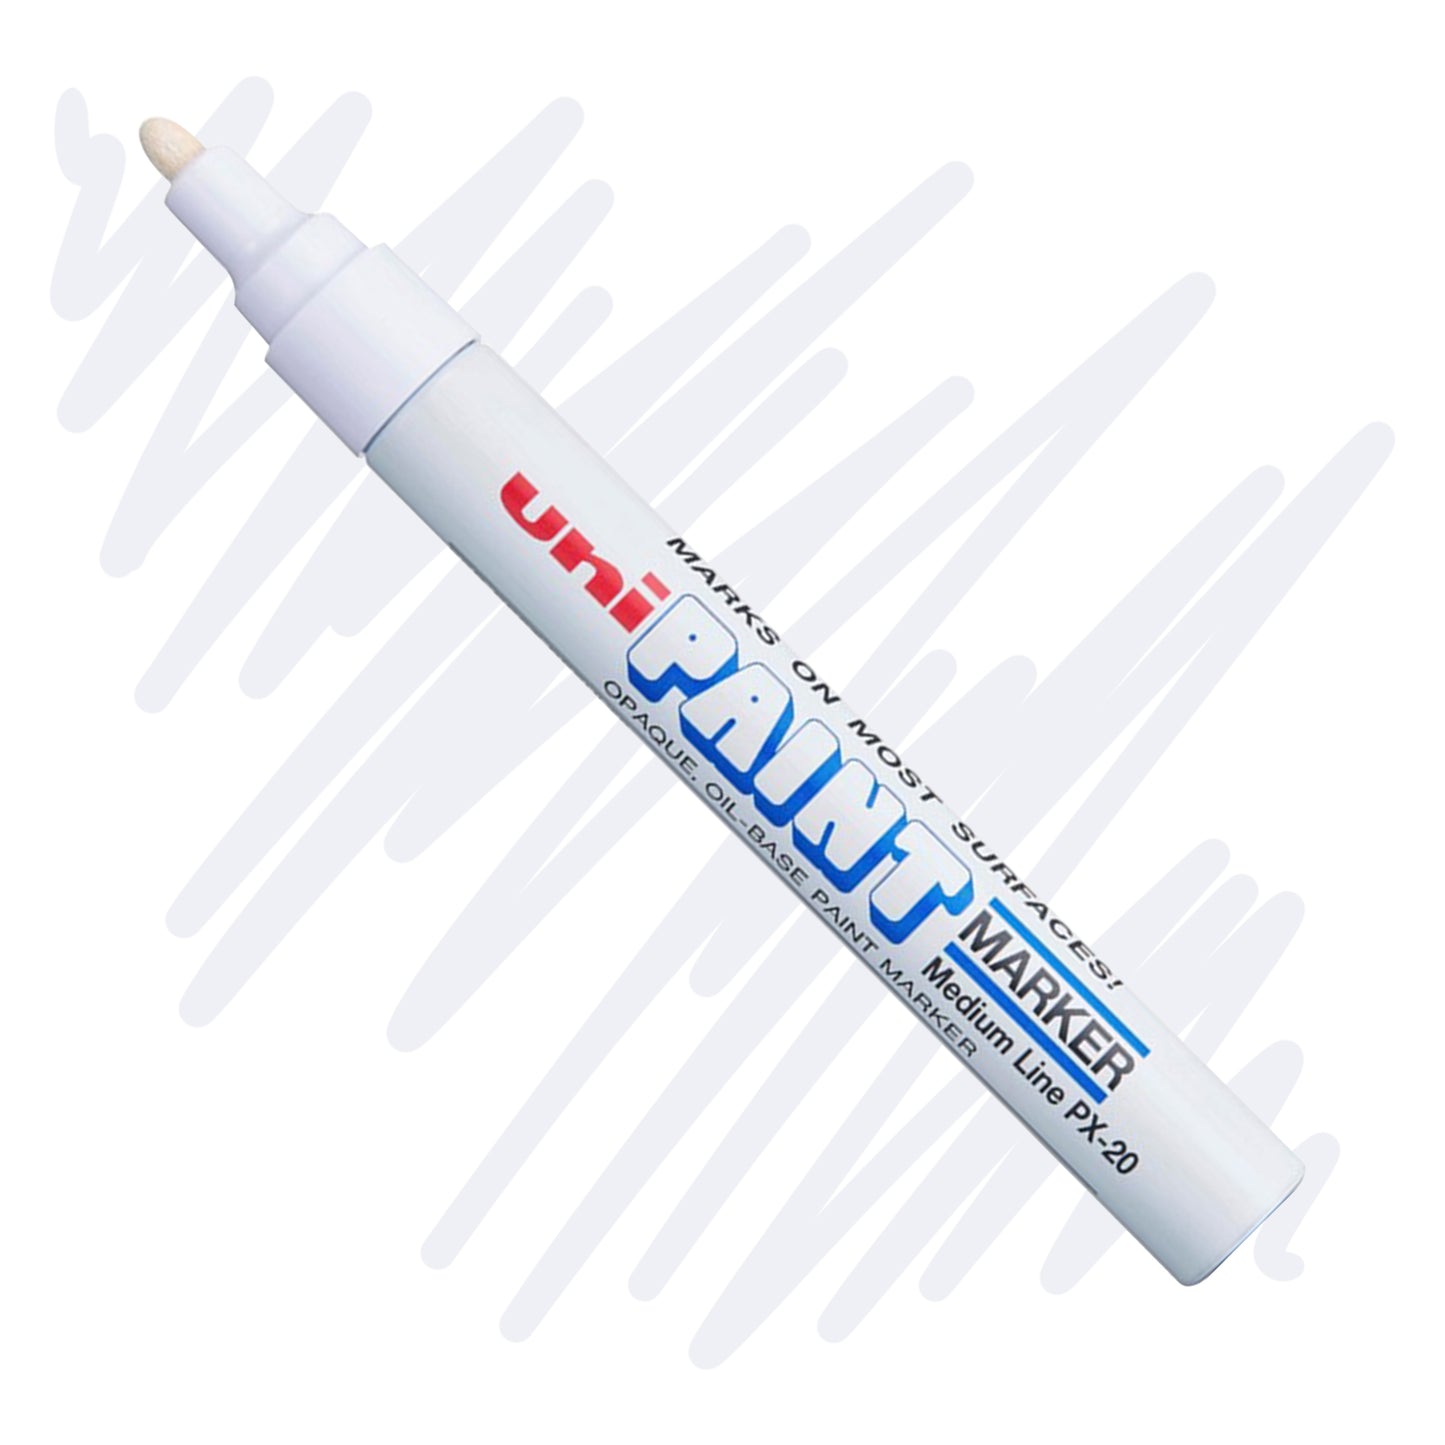 A white marker angled diagonally, the tip of the marker and the nib are colored white. On the marker body the label reads "Uni PAINT Maker". Behind the marker is a color swatch of a squiggly line in white.